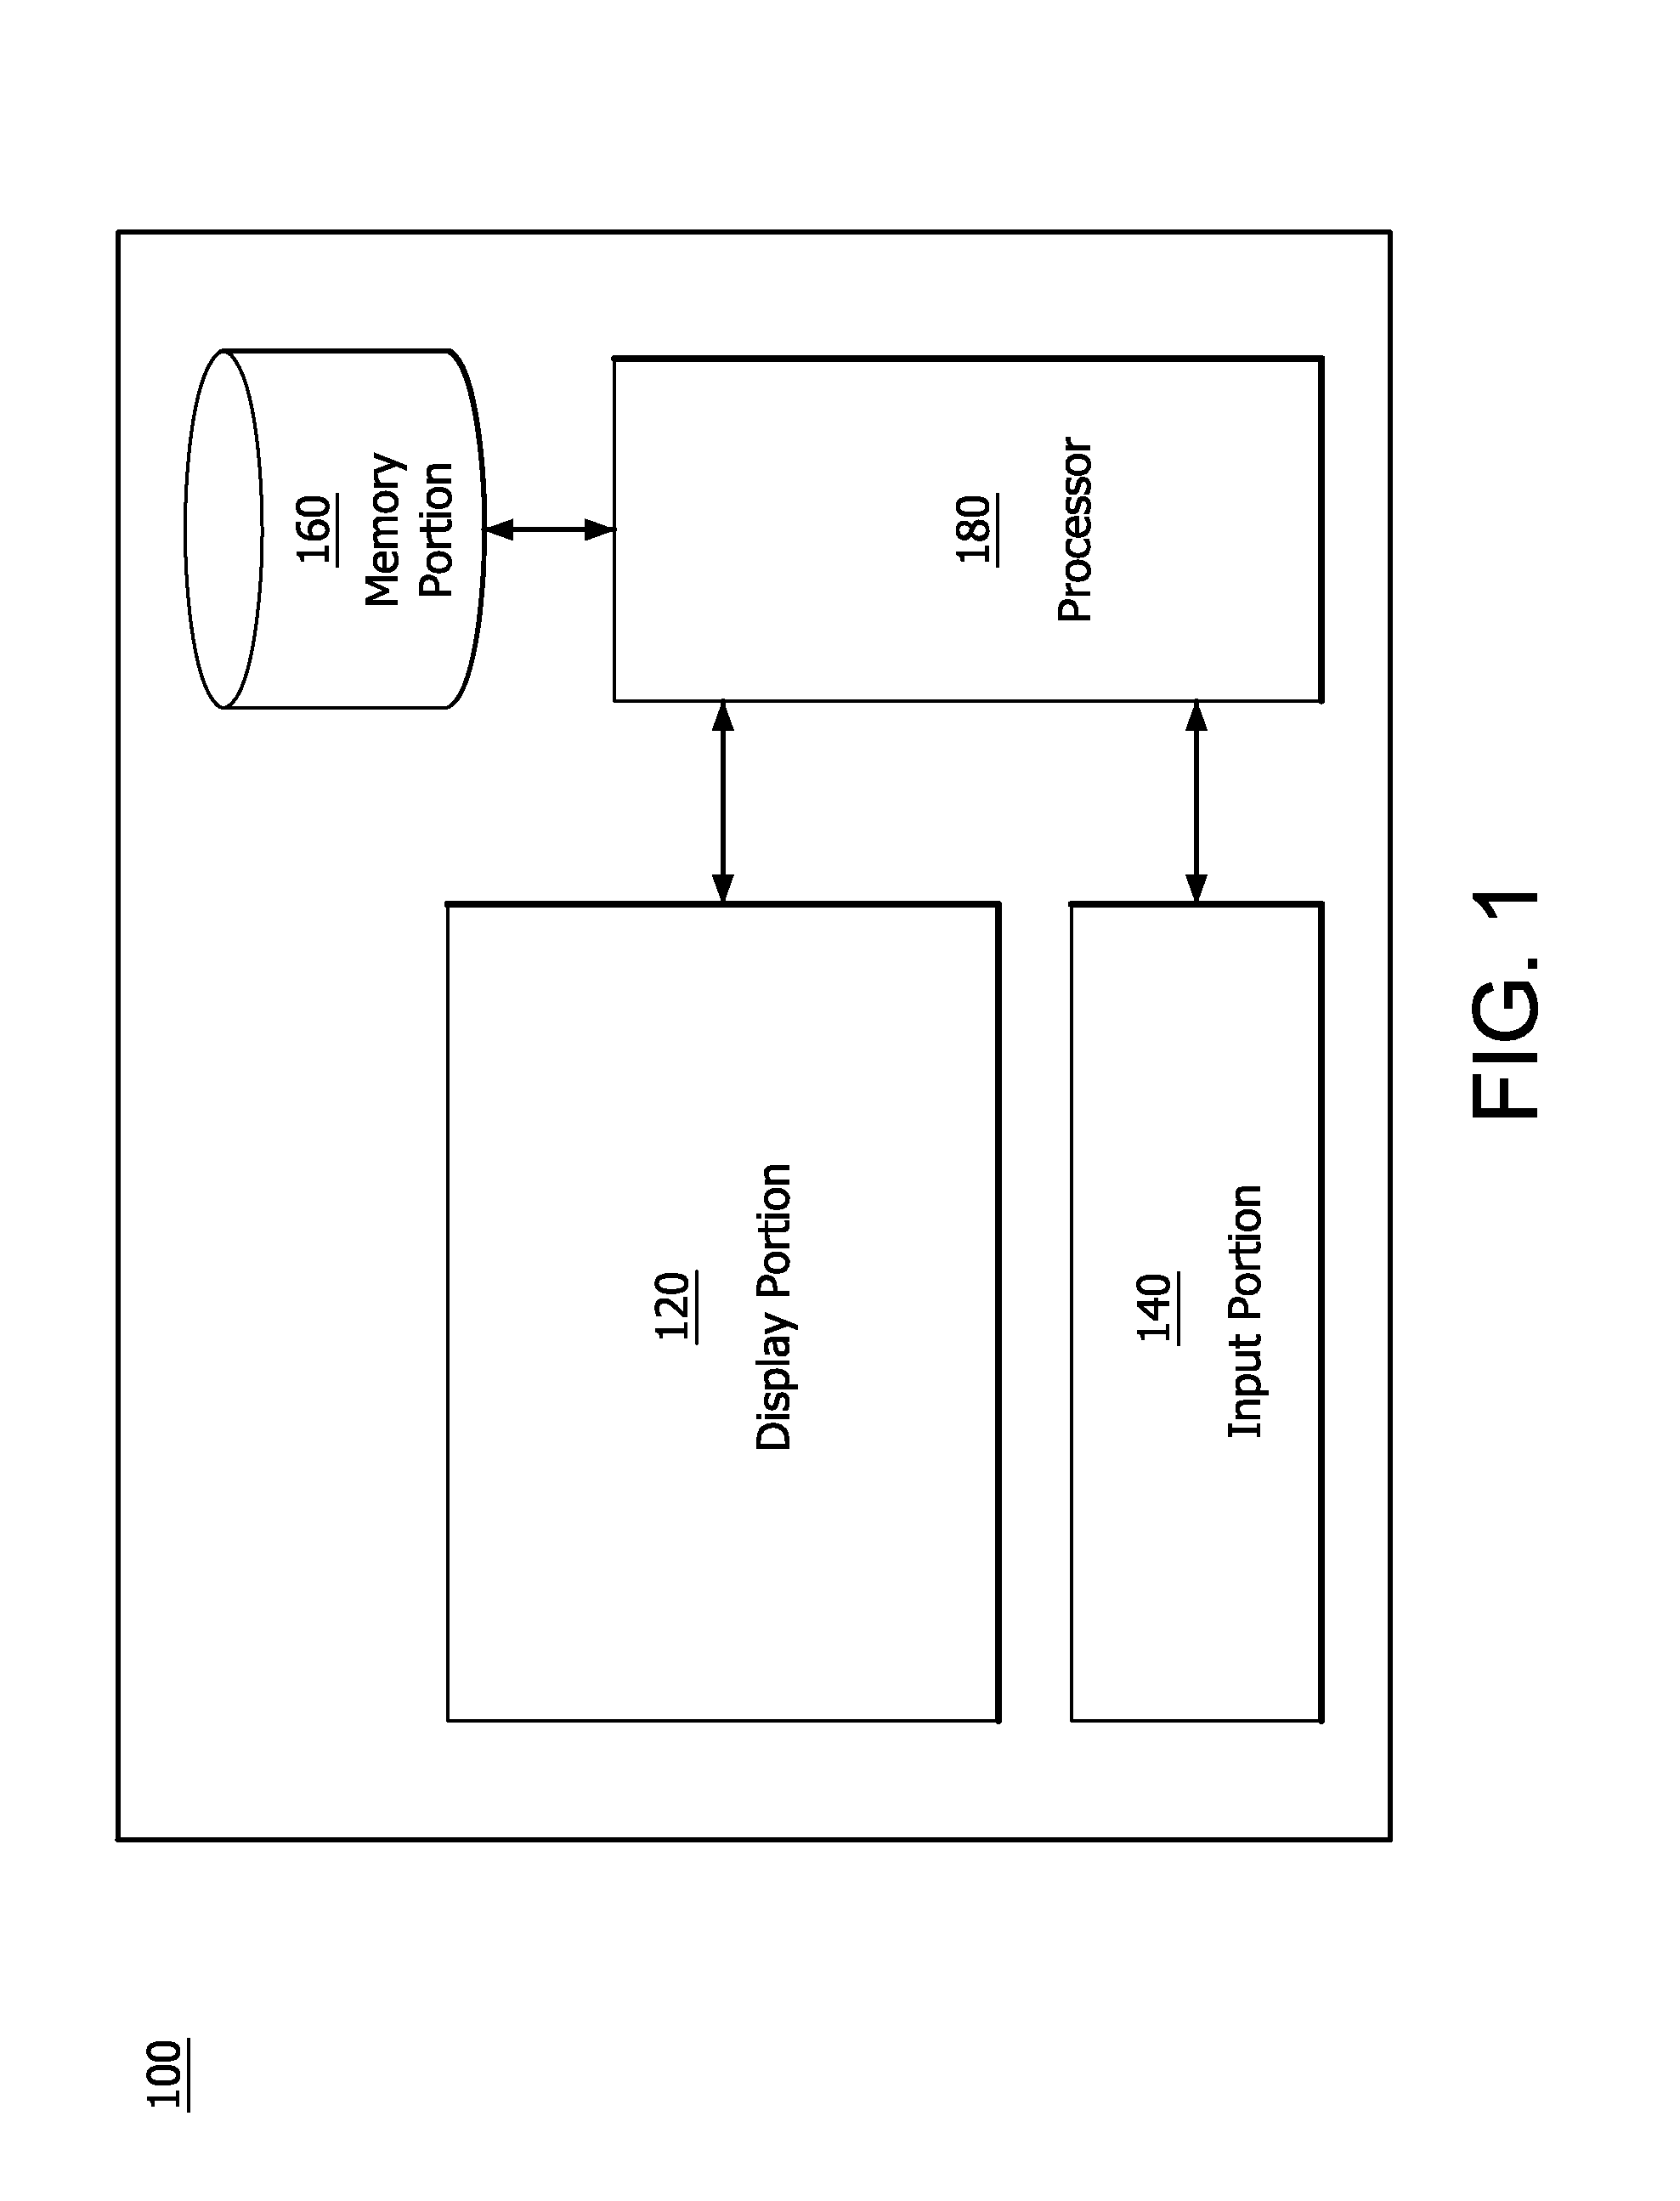 Methods and systems for scheduling a shared ride among commuters